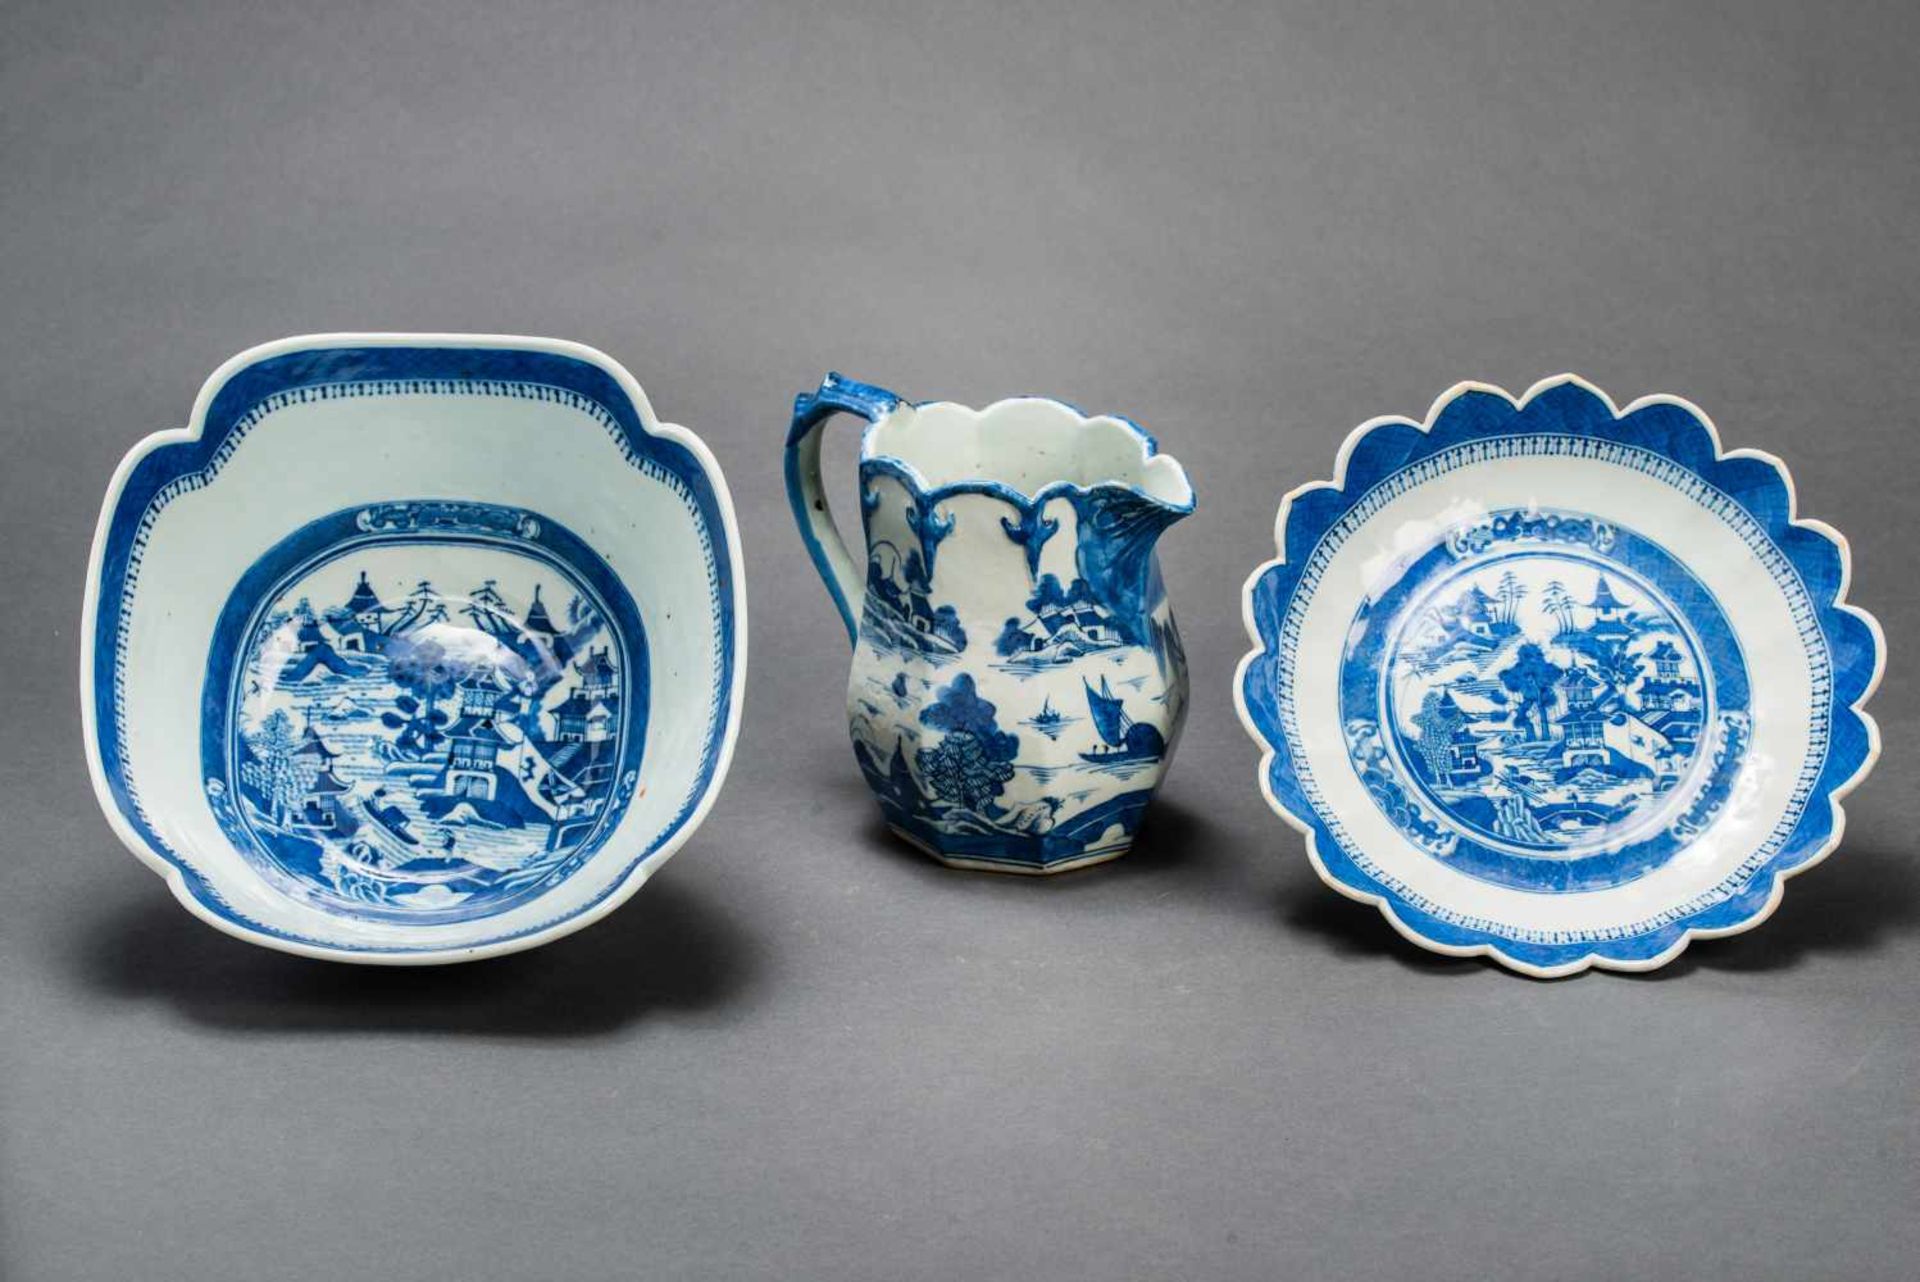 TWO DEEP BOWLS AND A MATCHING PITCHERBlue and white porcelain China, Qing dynasty, 19th cent. Two